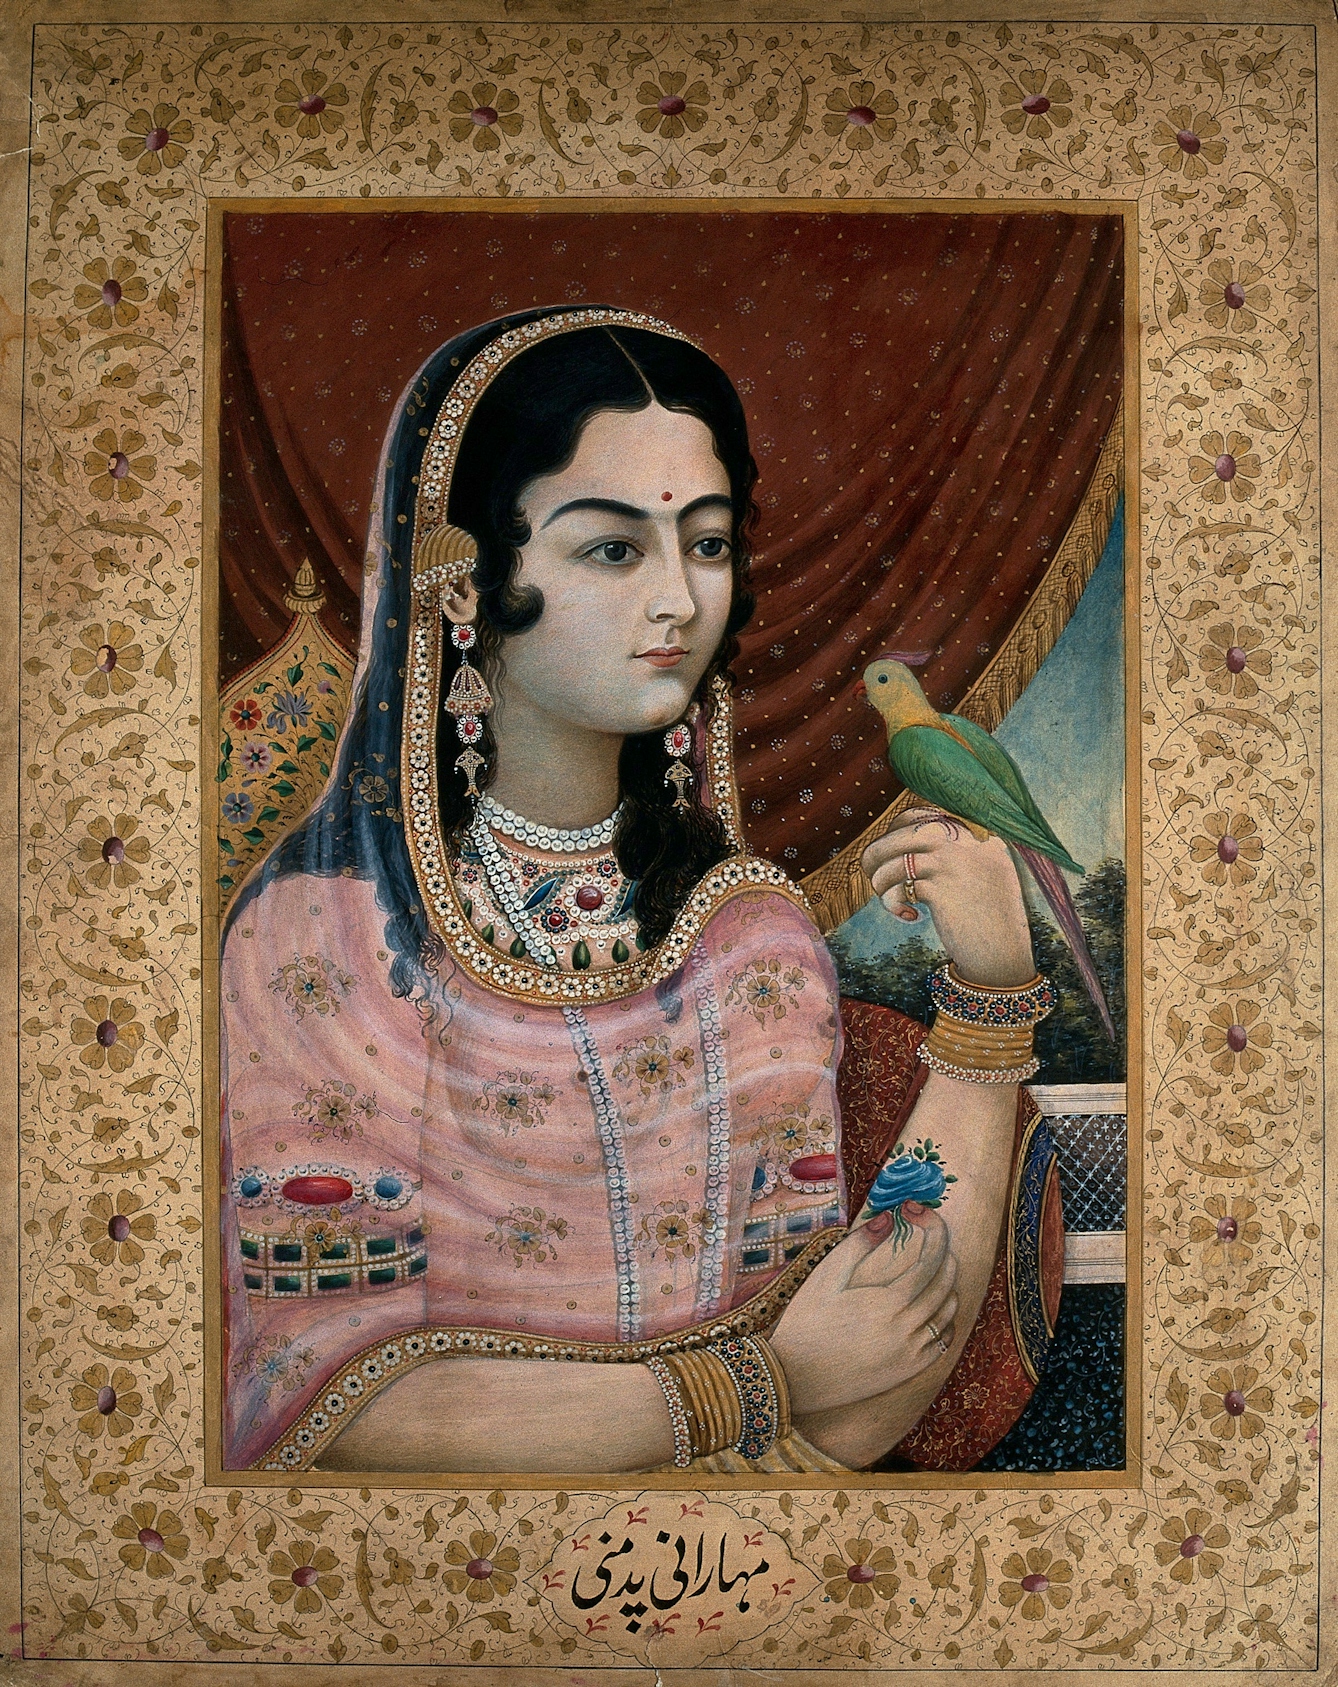 Colourful illustration of a Mughal courtesan or member of a Mughal royal family looking at a parrot perched on her hand.